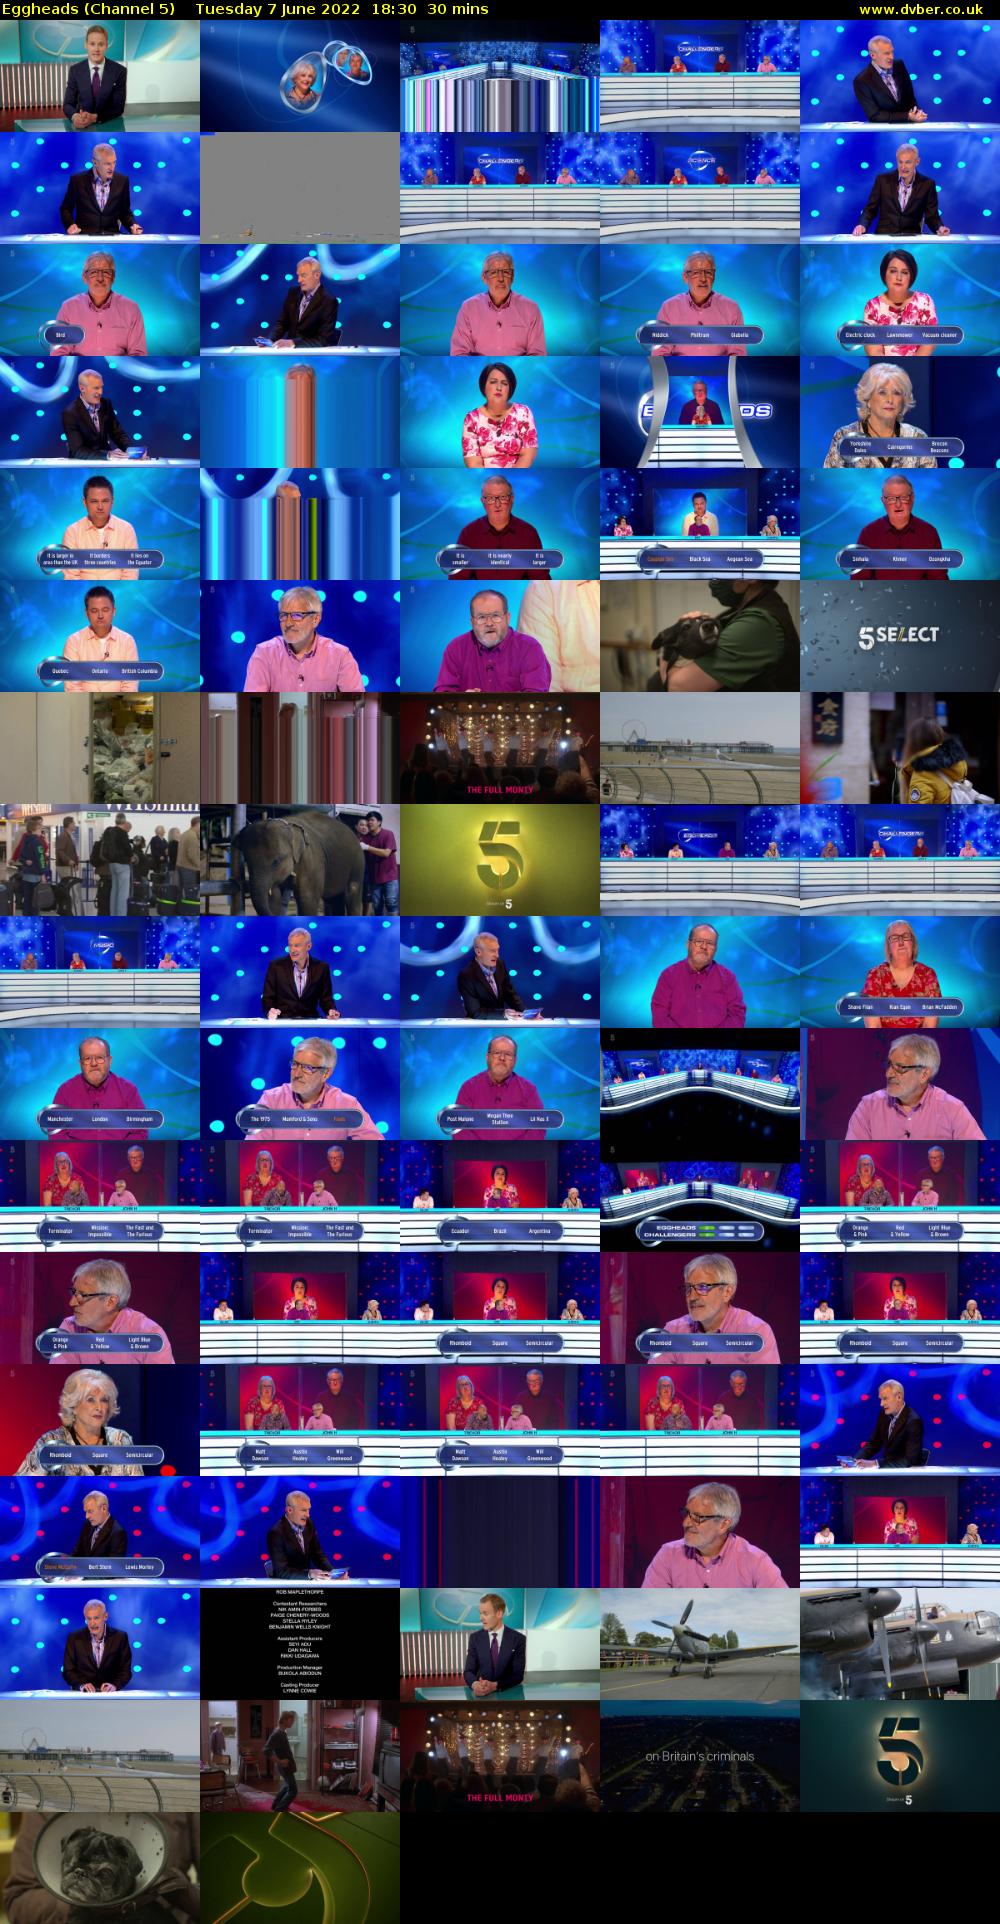 Eggheads (Channel 5) Tuesday 7 June 2022 18:30 - 19:00